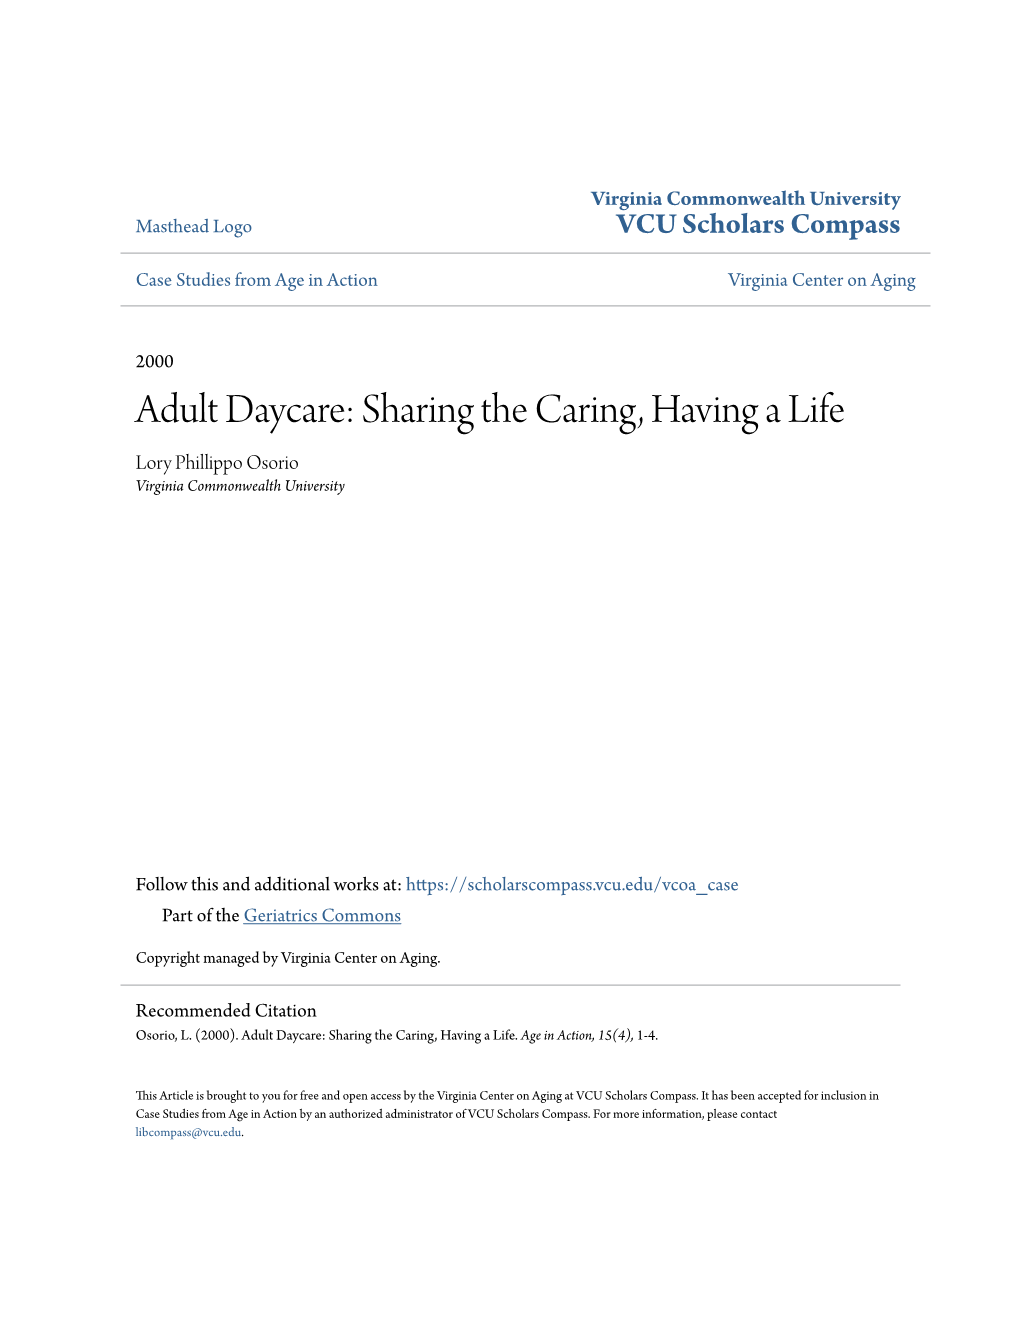 Adult Daycare: Sharing the Caring, Having a Life Lory Phillippo Osorio Virginia Commonwealth University